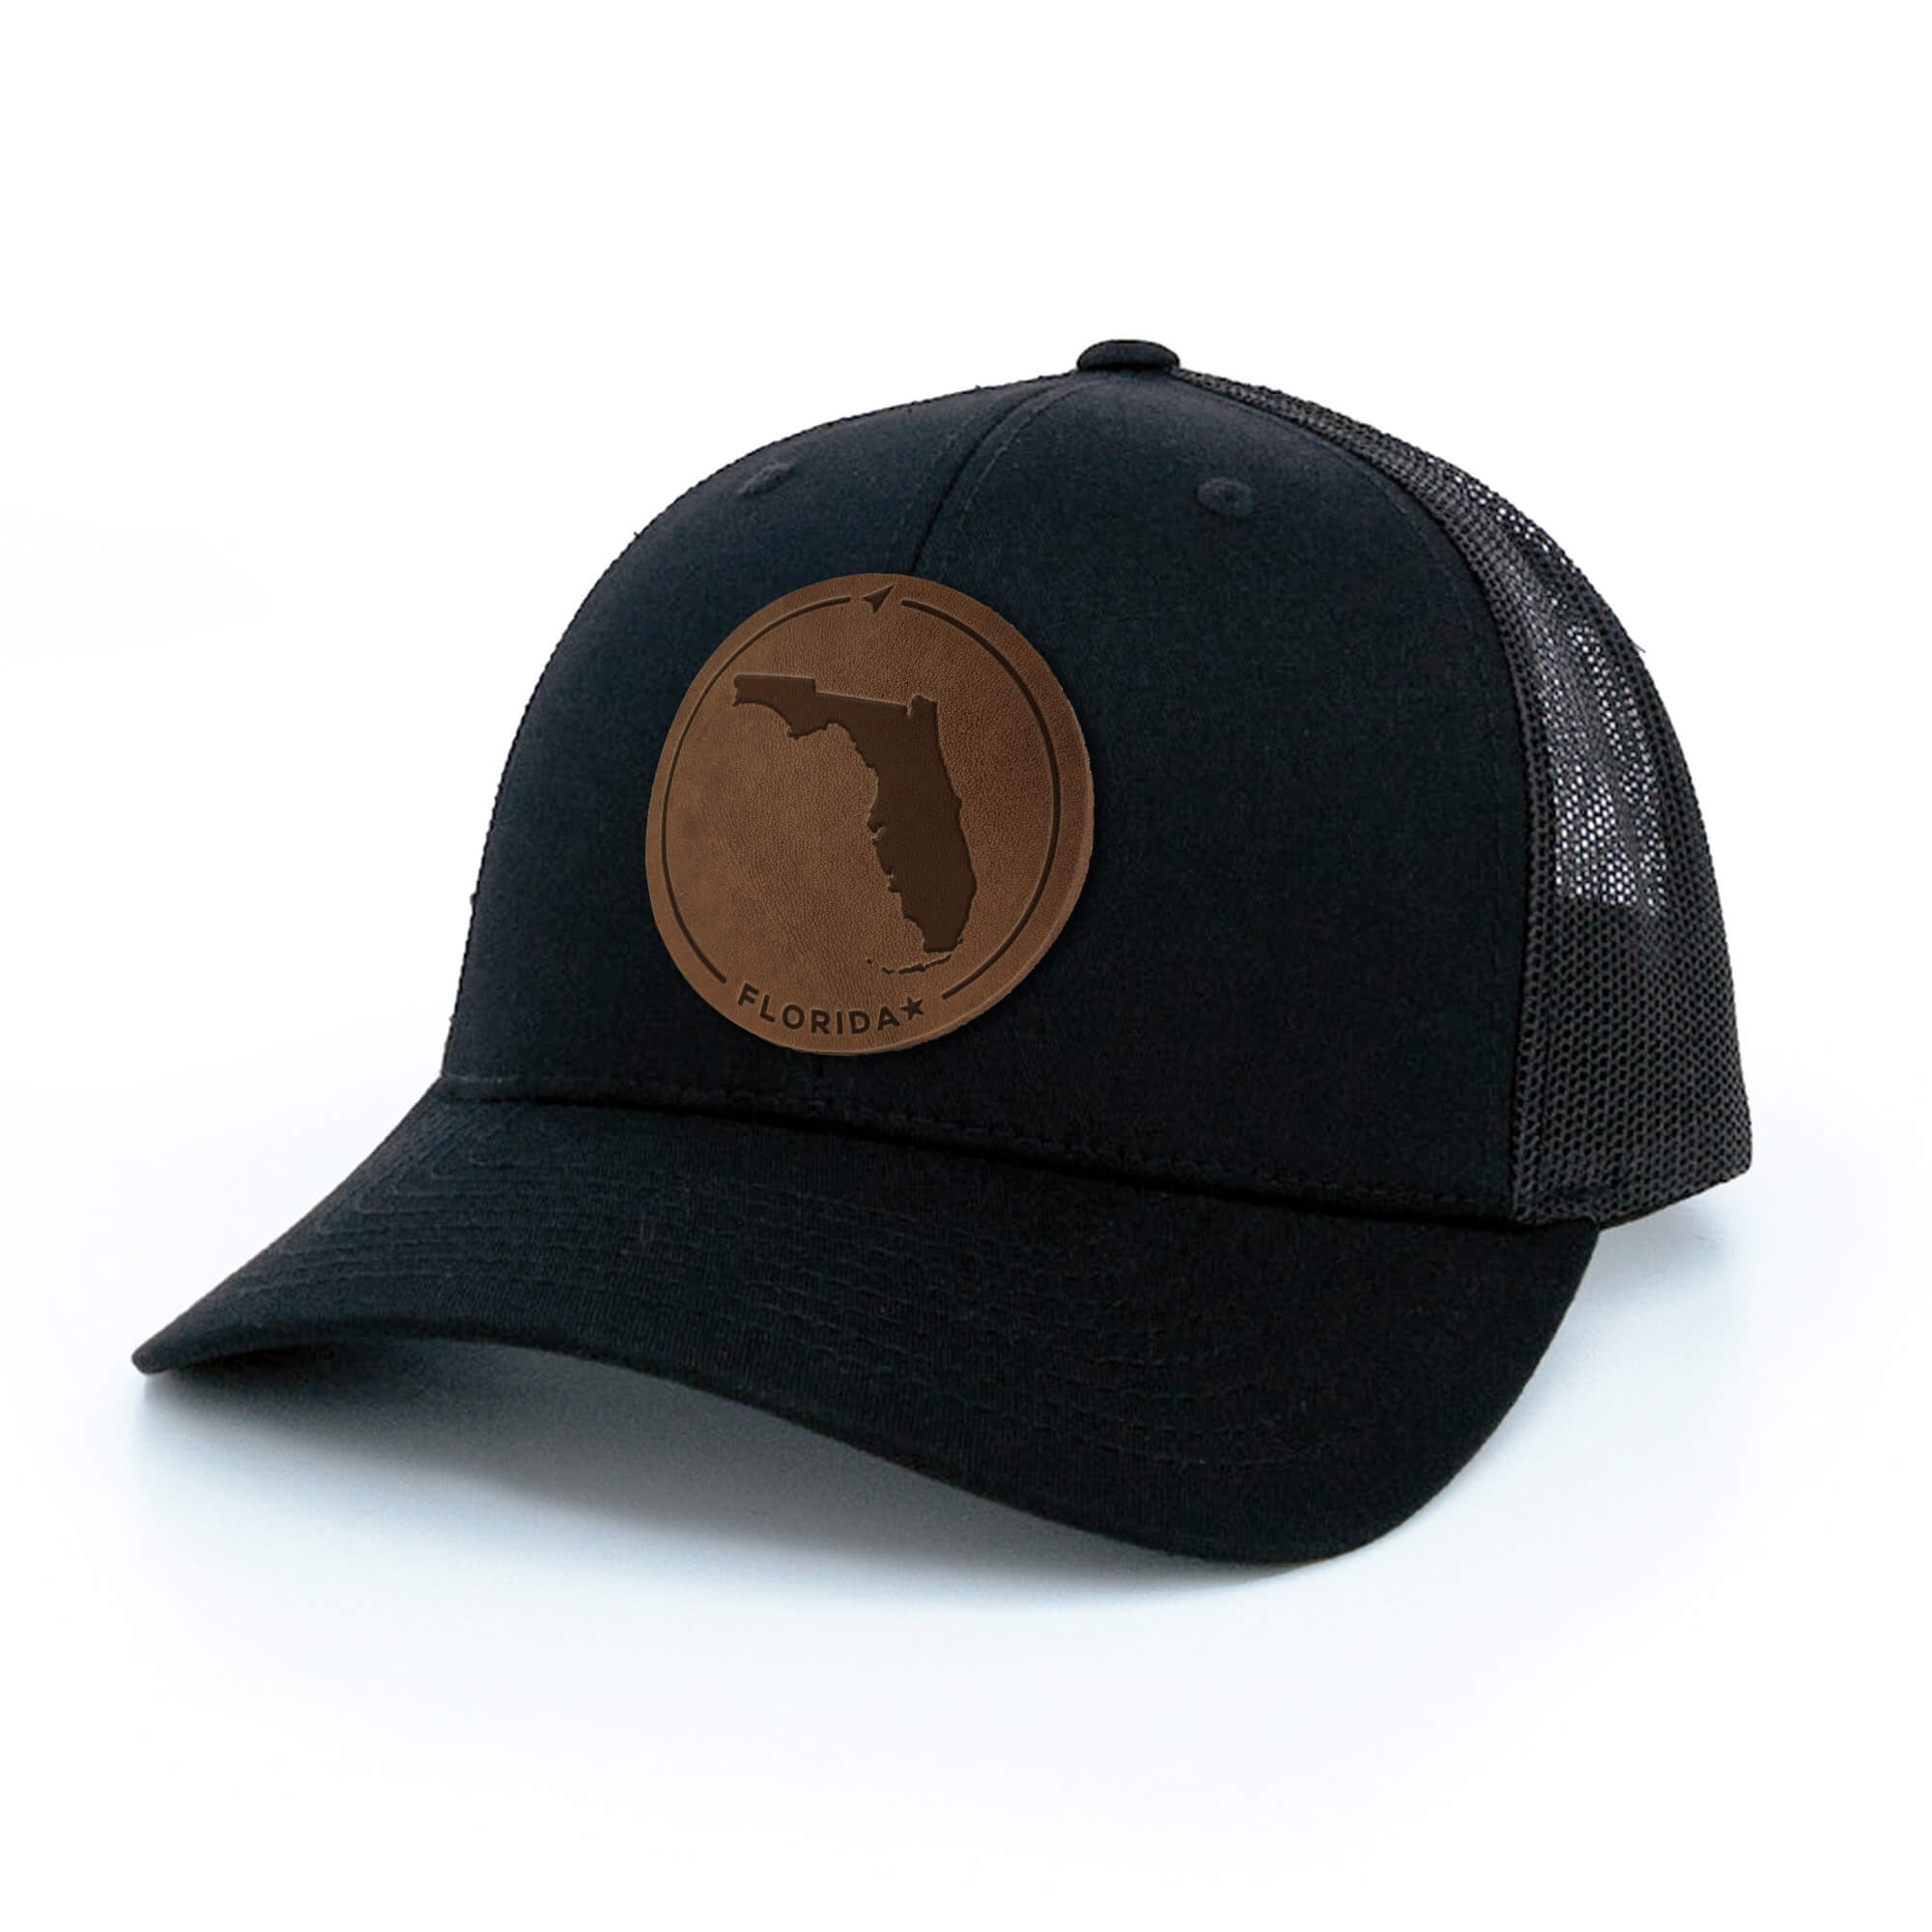 Black trucker hat with full-grain leather patch of Florida | BLACK-003-010, CHARC-003-010, NAVY-003-010, HGREY-003-010, MOSS-003-010, BROWN-003-010